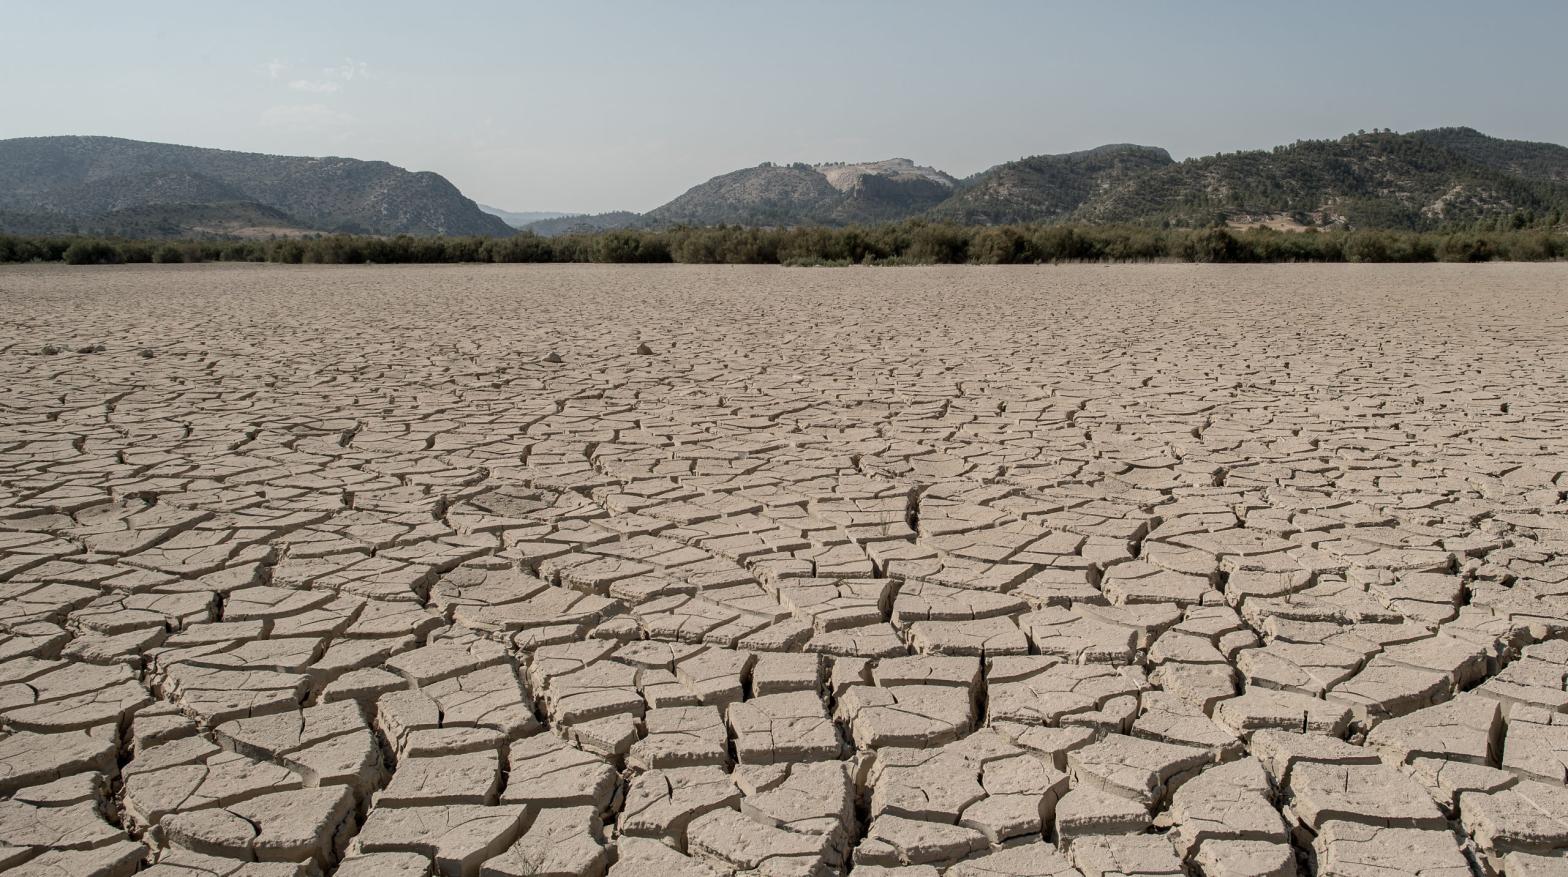 Dried cracked mud is seen at the Valdeinfierno Reservoir in Zarcilla de Ramos, Spain. (Photo: David Ramos, Getty Images)